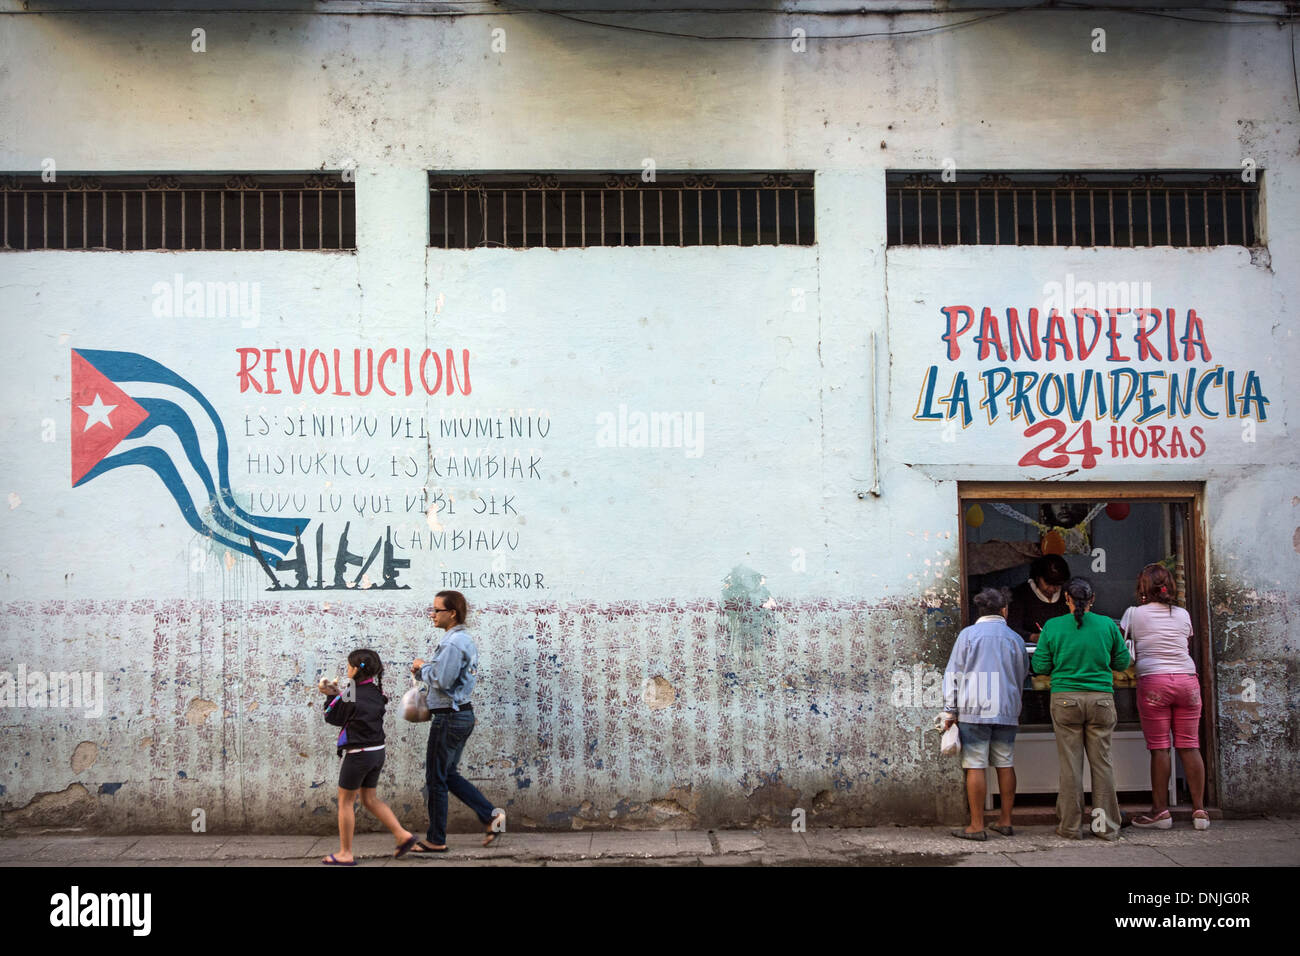 POLITICAL GRAFFITI ABOUT THE CUBAN REVOLUTION (REVOLUCION) ON THE WALL OF A PANADERIA, STATE BAKERY ACCEPTING RATION CARDS, STREET SCENE AND DAILY LIFE, HAVANA, CUBA, THE CARIBBEAN Stock Photo